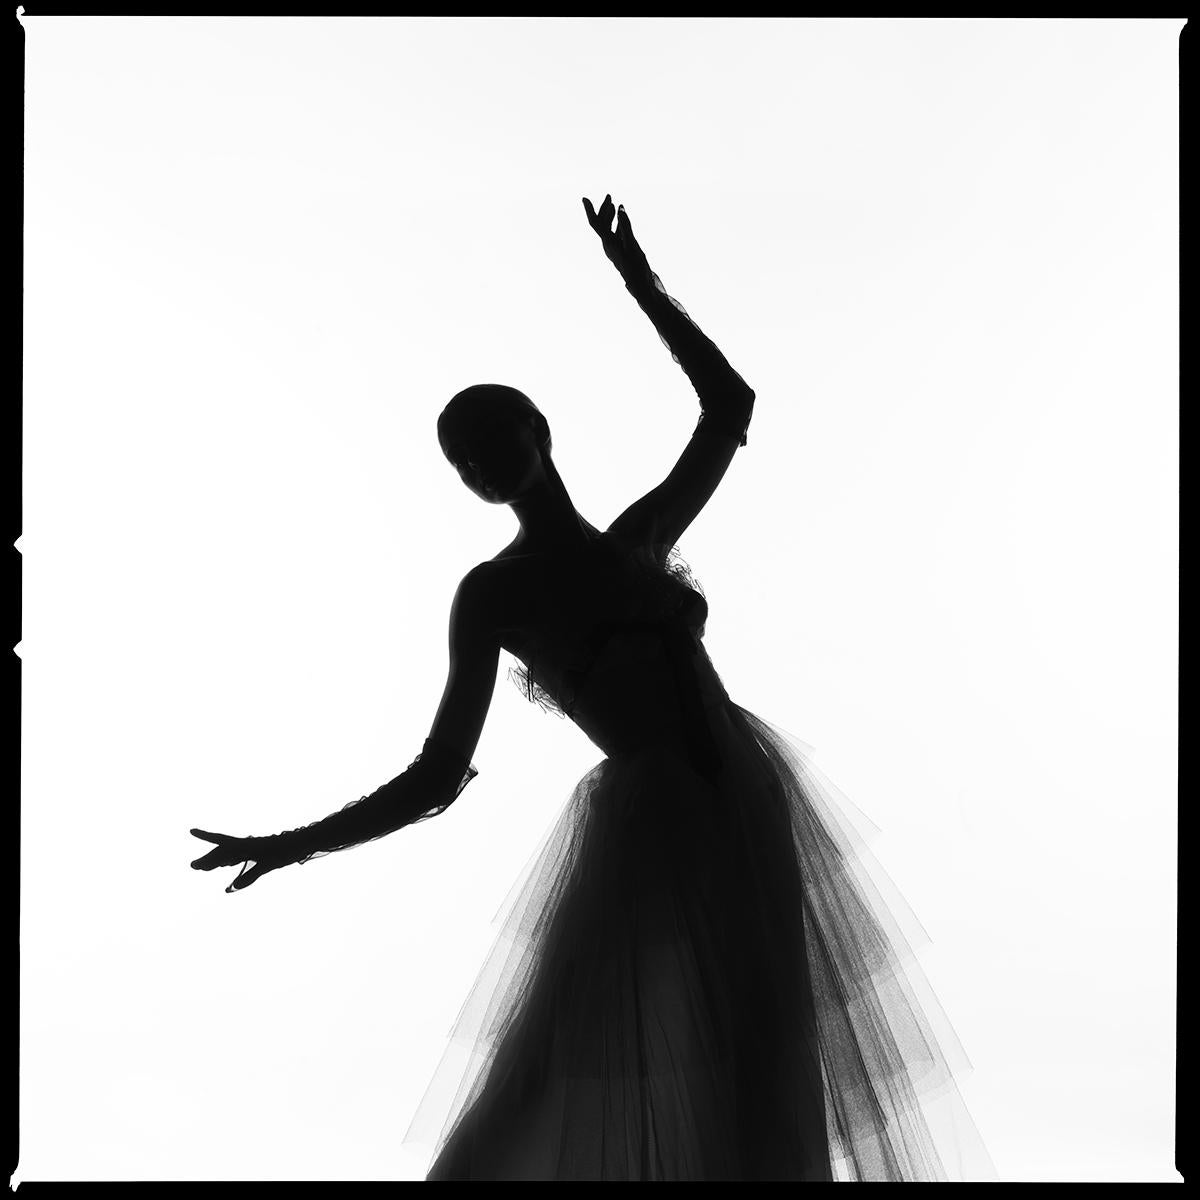 Series: Dress Silhouette 
Chromogenic Print on Kodak Endura Luster Paper
All available sizes and editions:
18" x 18"
30" x 30"
45" x 45"
60" x 60"
70" x 70"
Editions of 3 + 2 Artist Proofs

Tyler Shields is a photographer, film director, and writer,